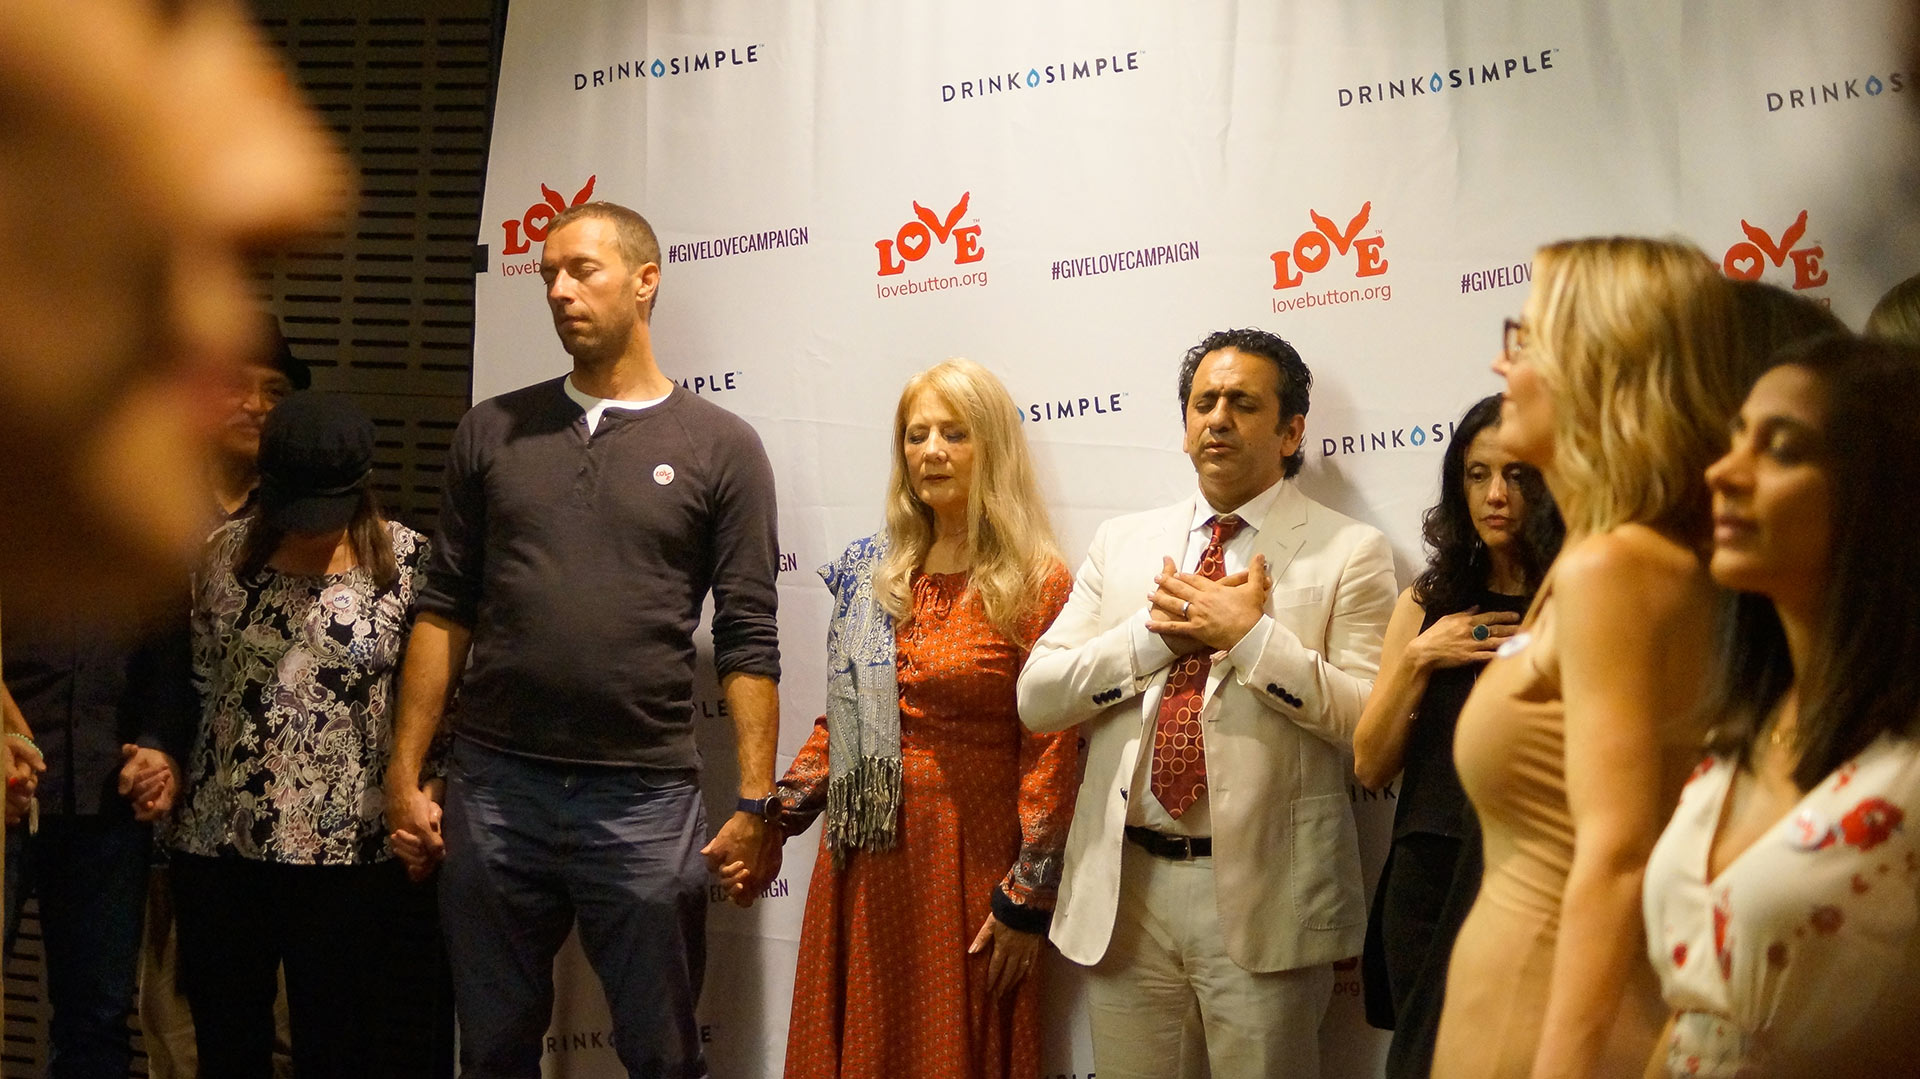 Love Button Co-Founder Habib Sadeghi along side supporters and Chris Martin of Coldplay for #GiveLoveCampaign Fundraiser